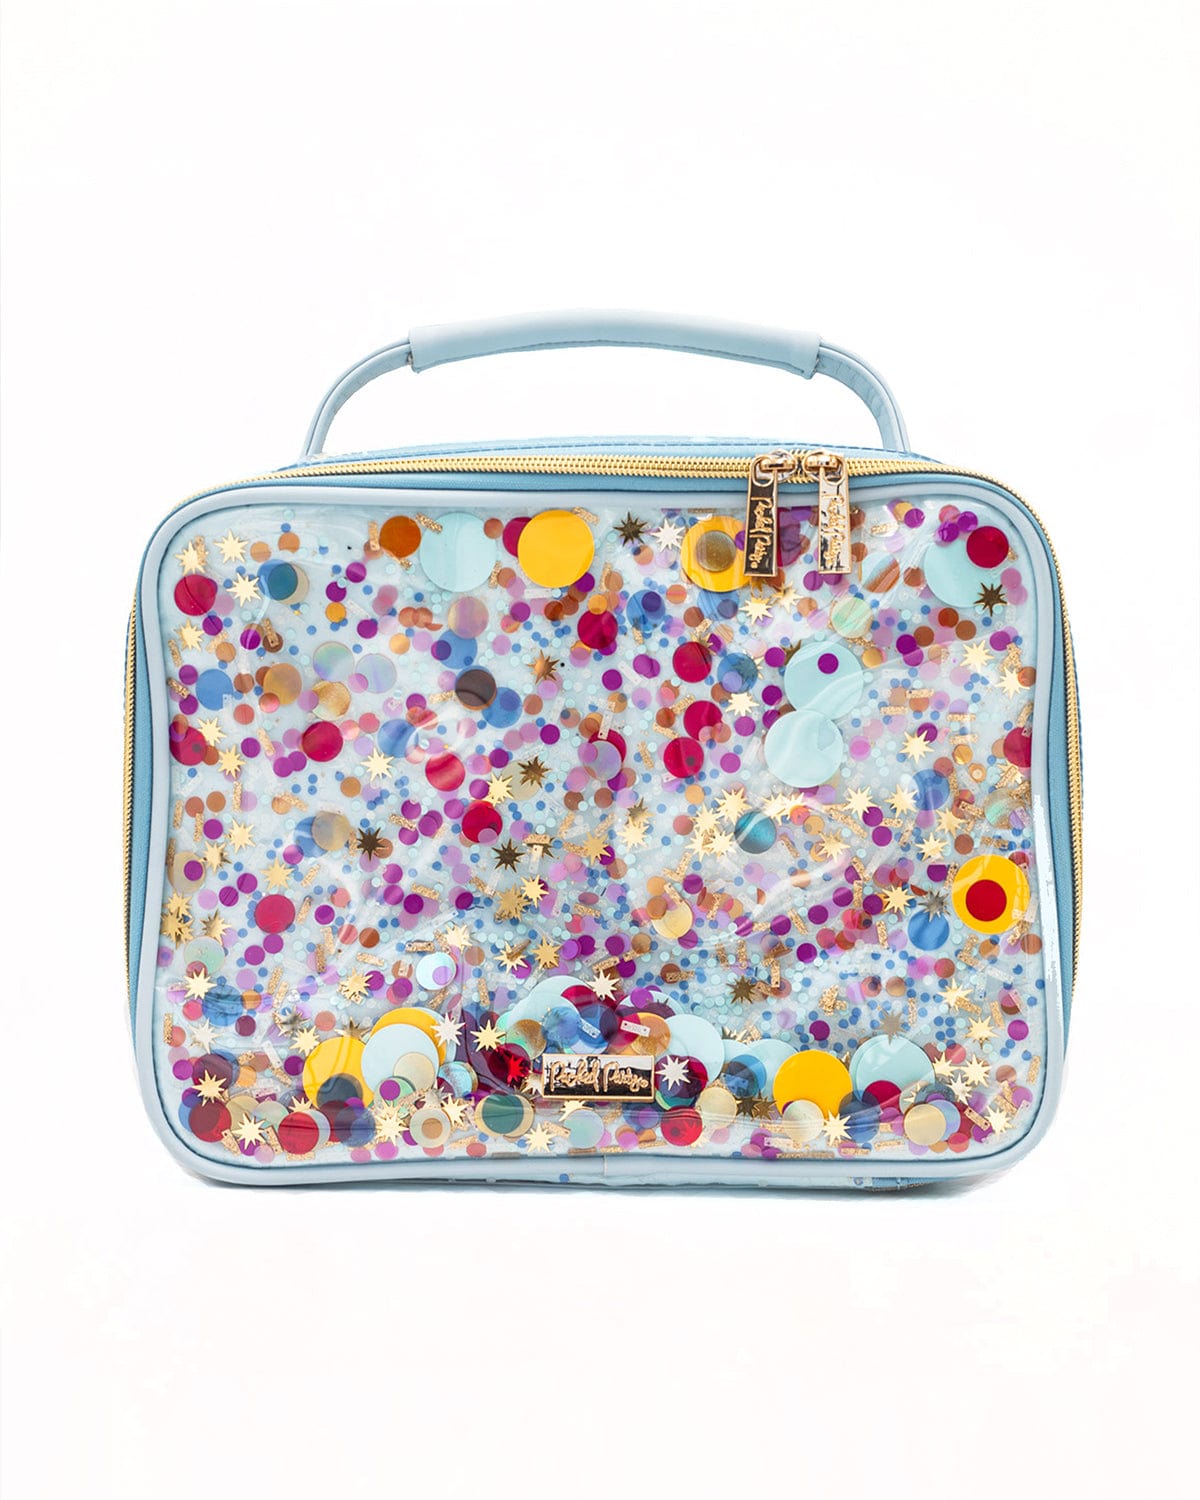 Celebrate Every Day Confetti Insulated Lunch Box Cooler